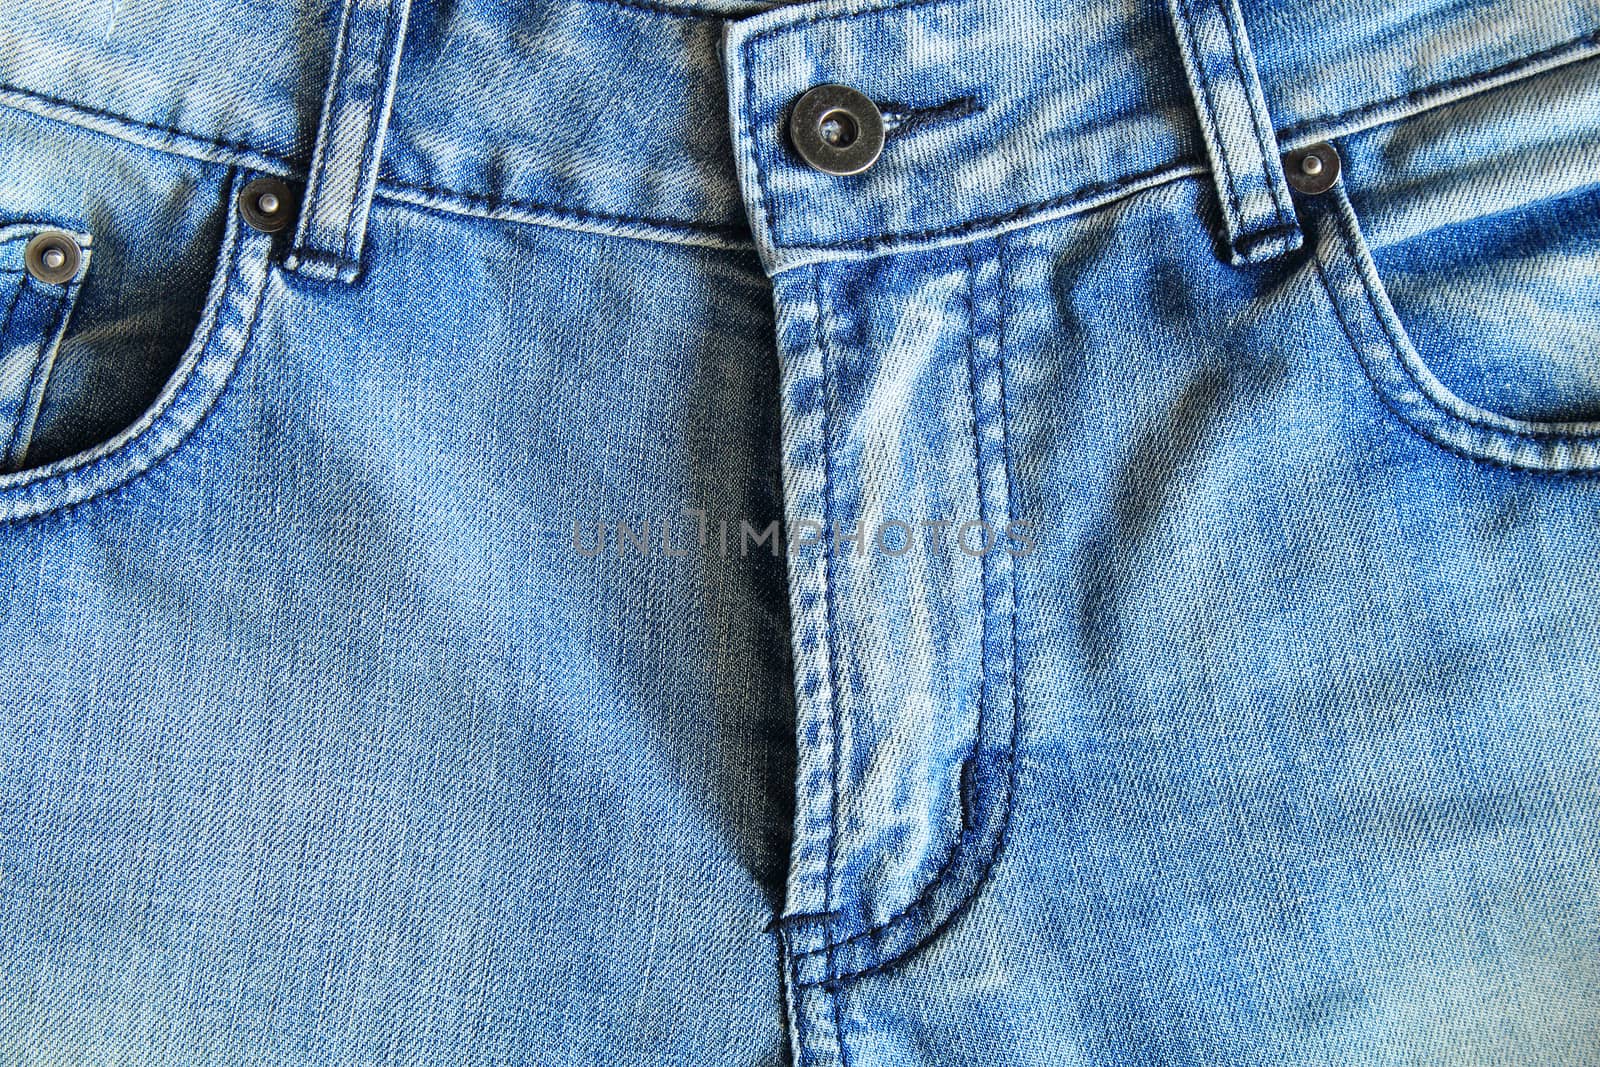 Detail of blue jeans by foto76